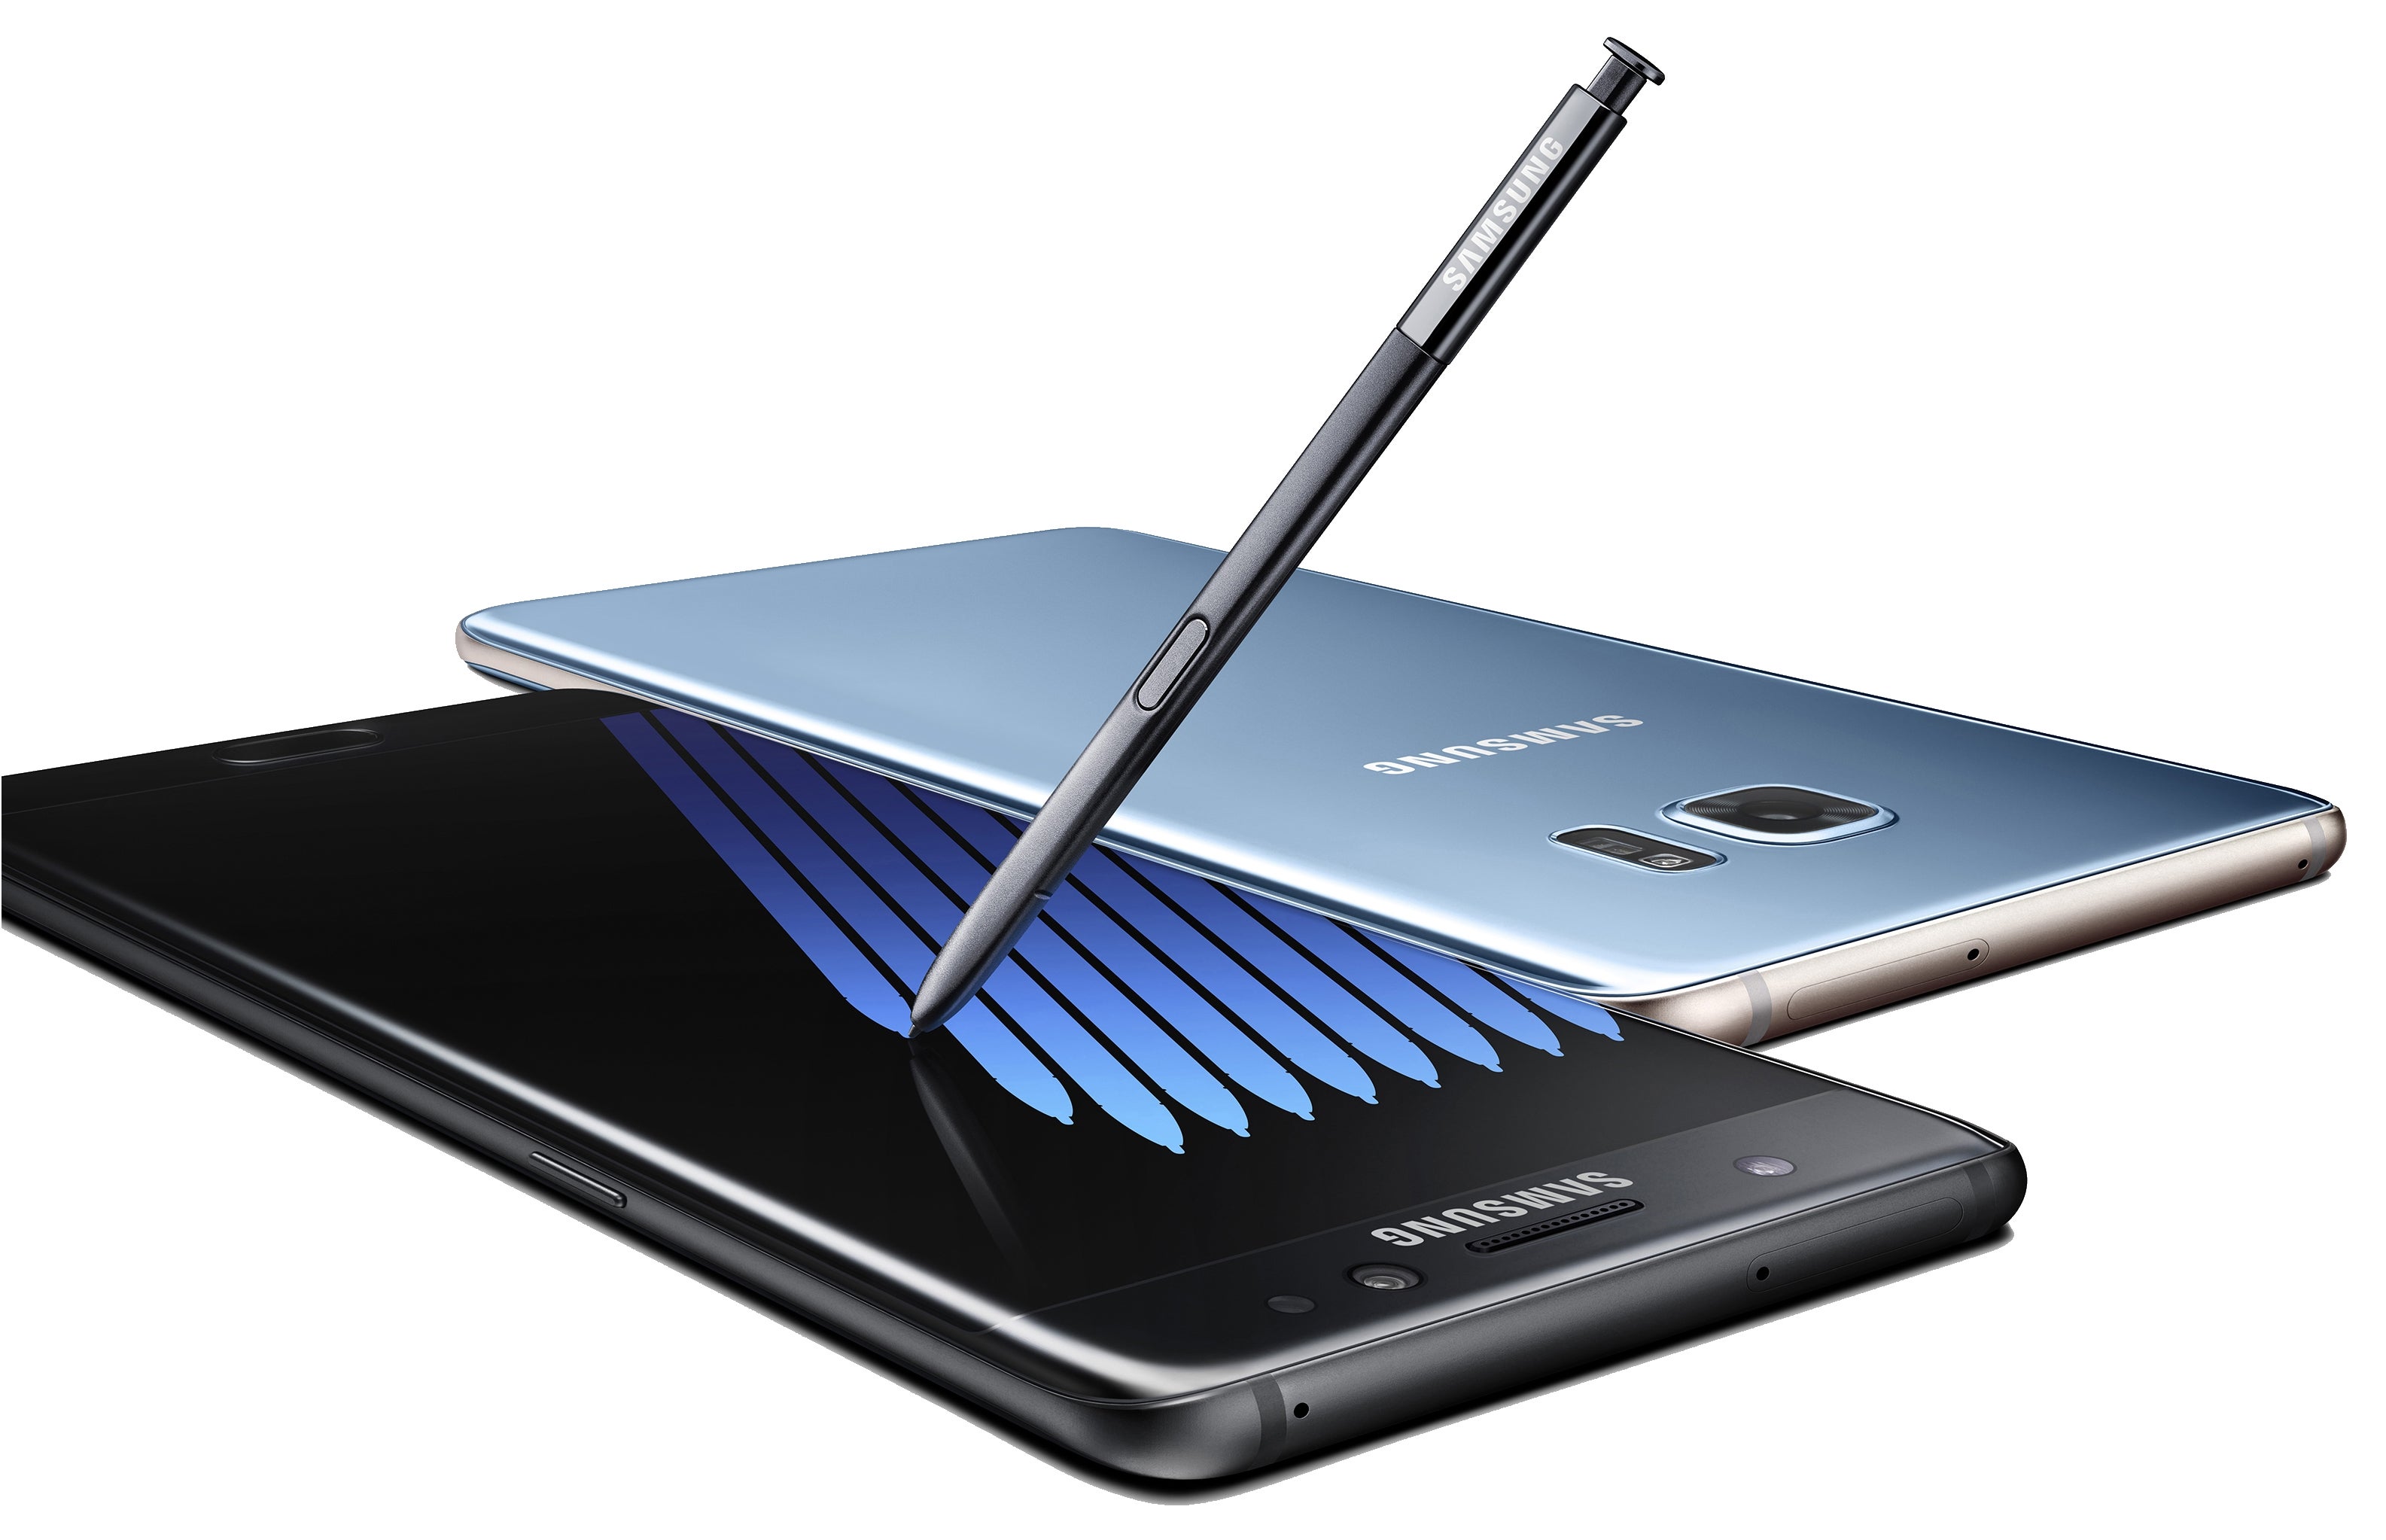 Samsung Galaxy Note 7 - specs review